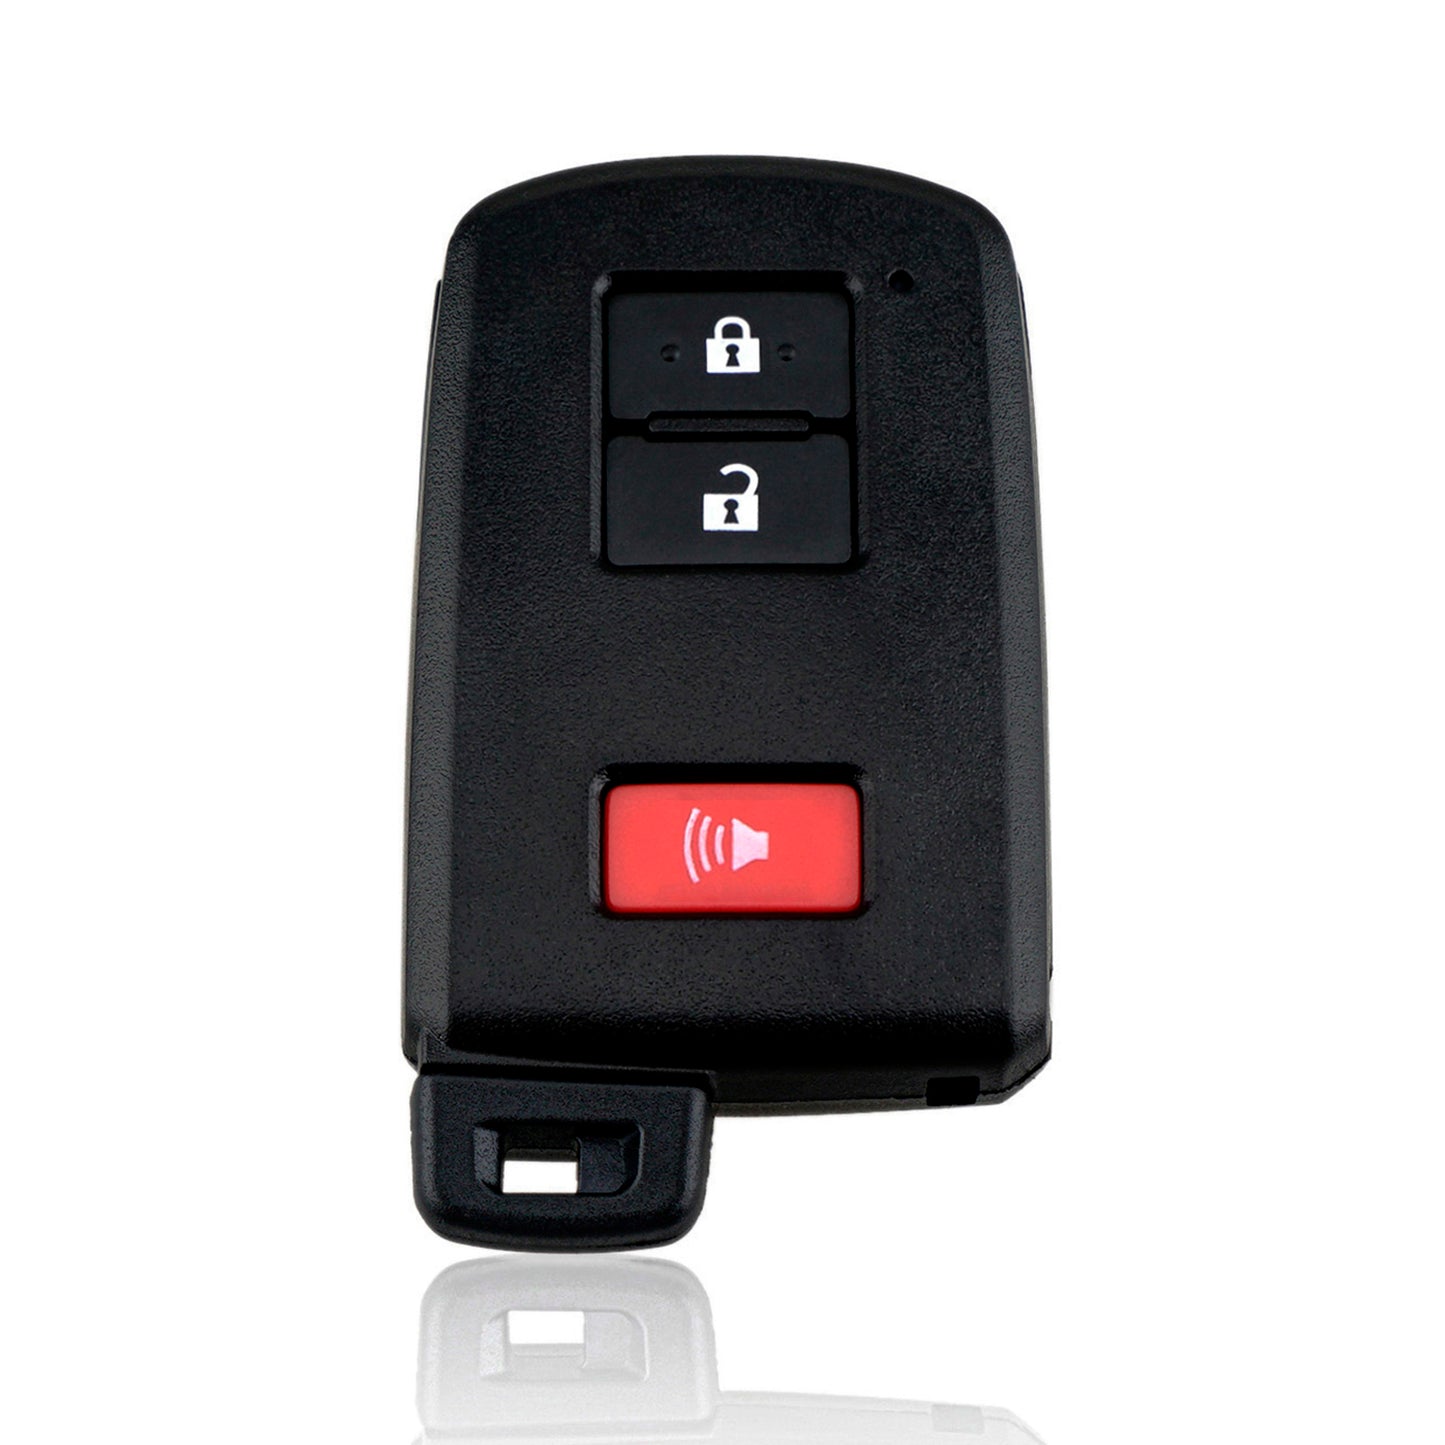 3 Buttons 315MHz Keyless Entry Fob Remote Car Key For 2015 - 2022 Toyota Tacoma Tundra Sequoia 4-Runner ATS XTS FCC ID:HYQ14FBB SKU : J870